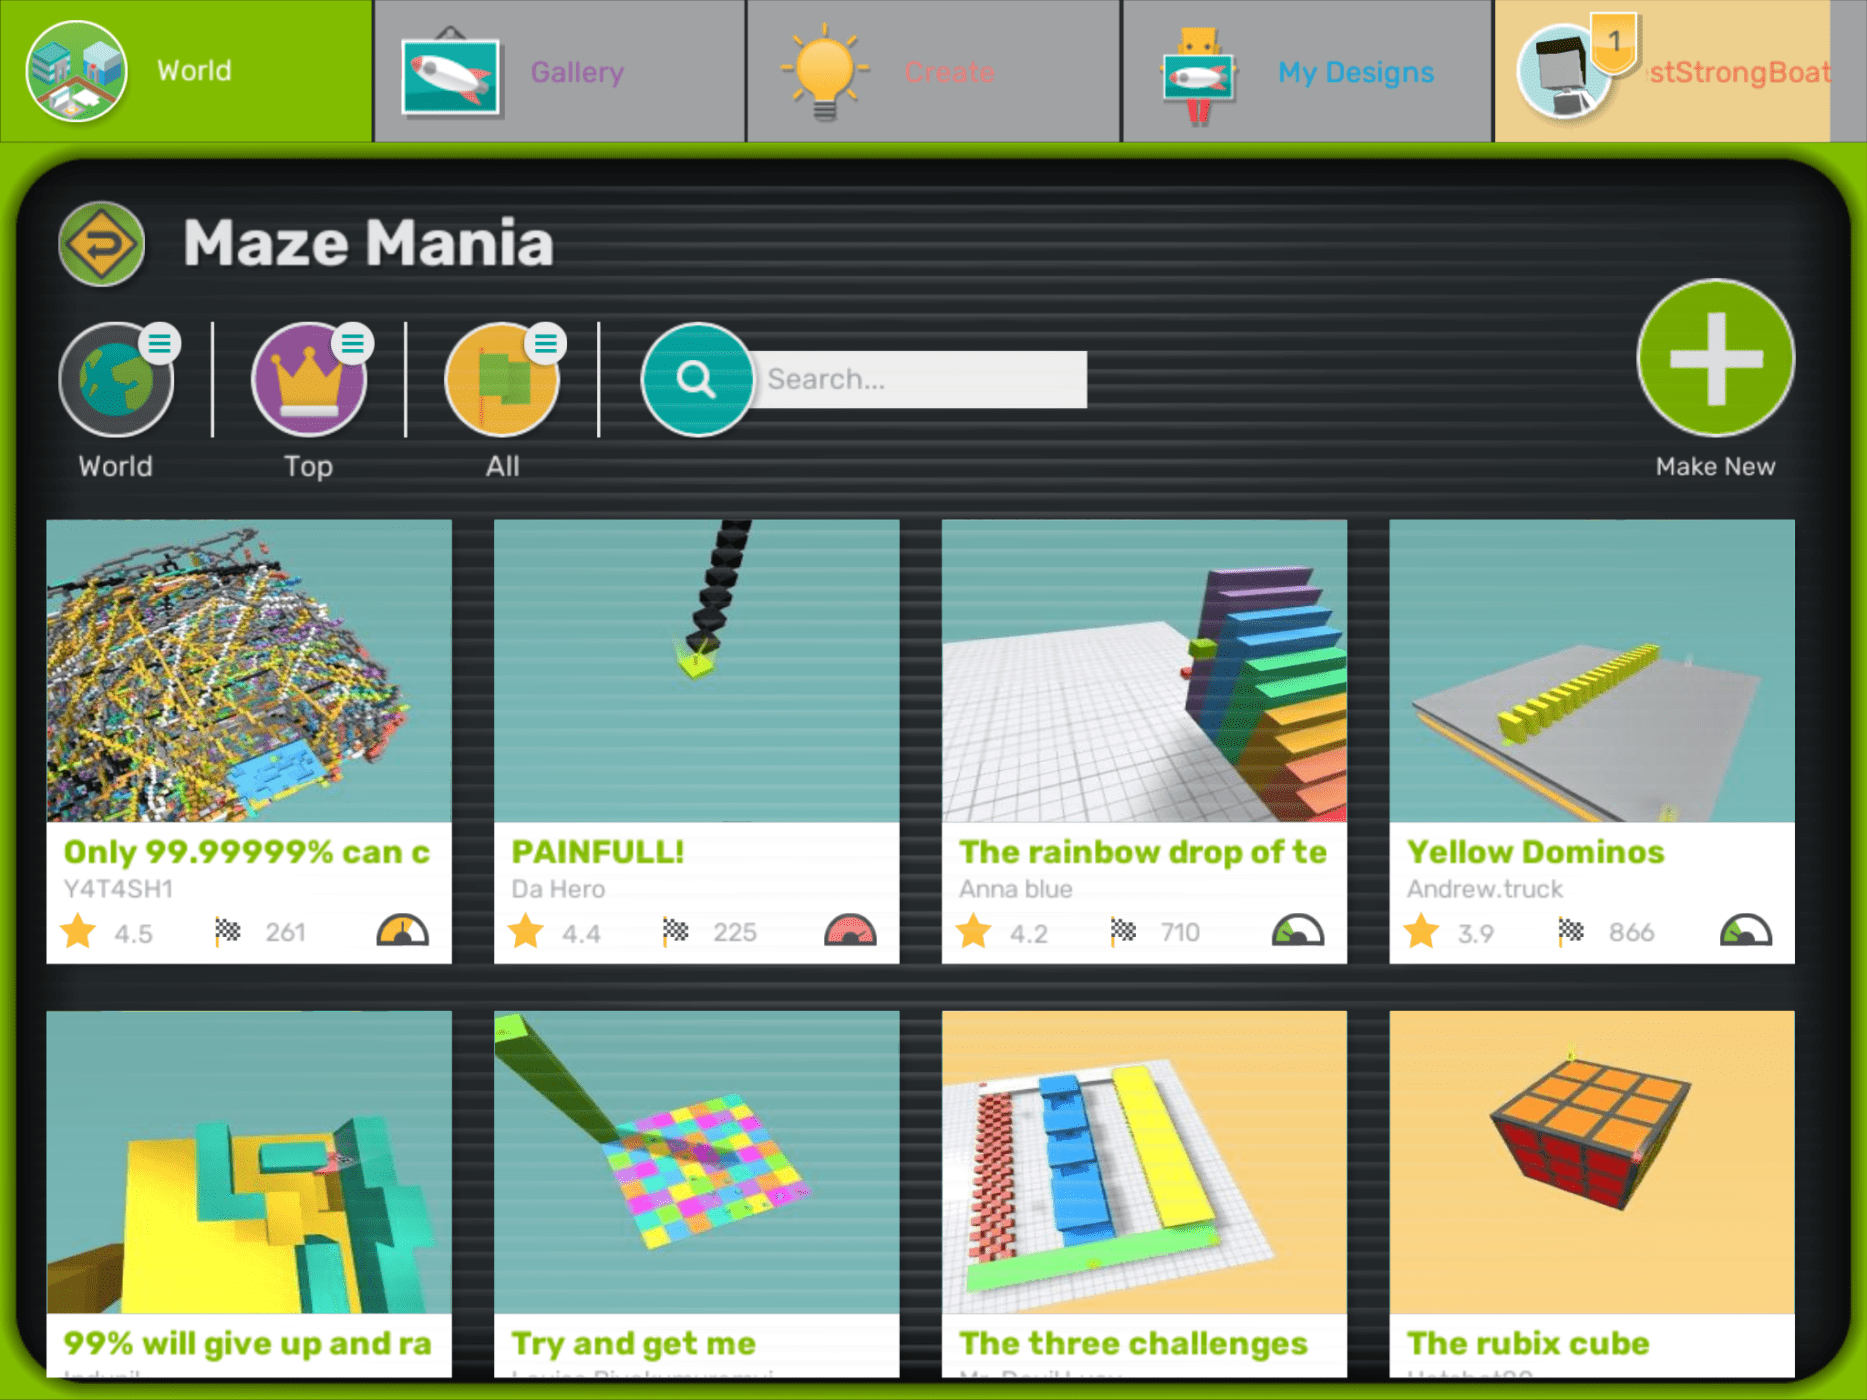 Makers Empire launches new 3D game creator, Maze Mania, in the Game Zone